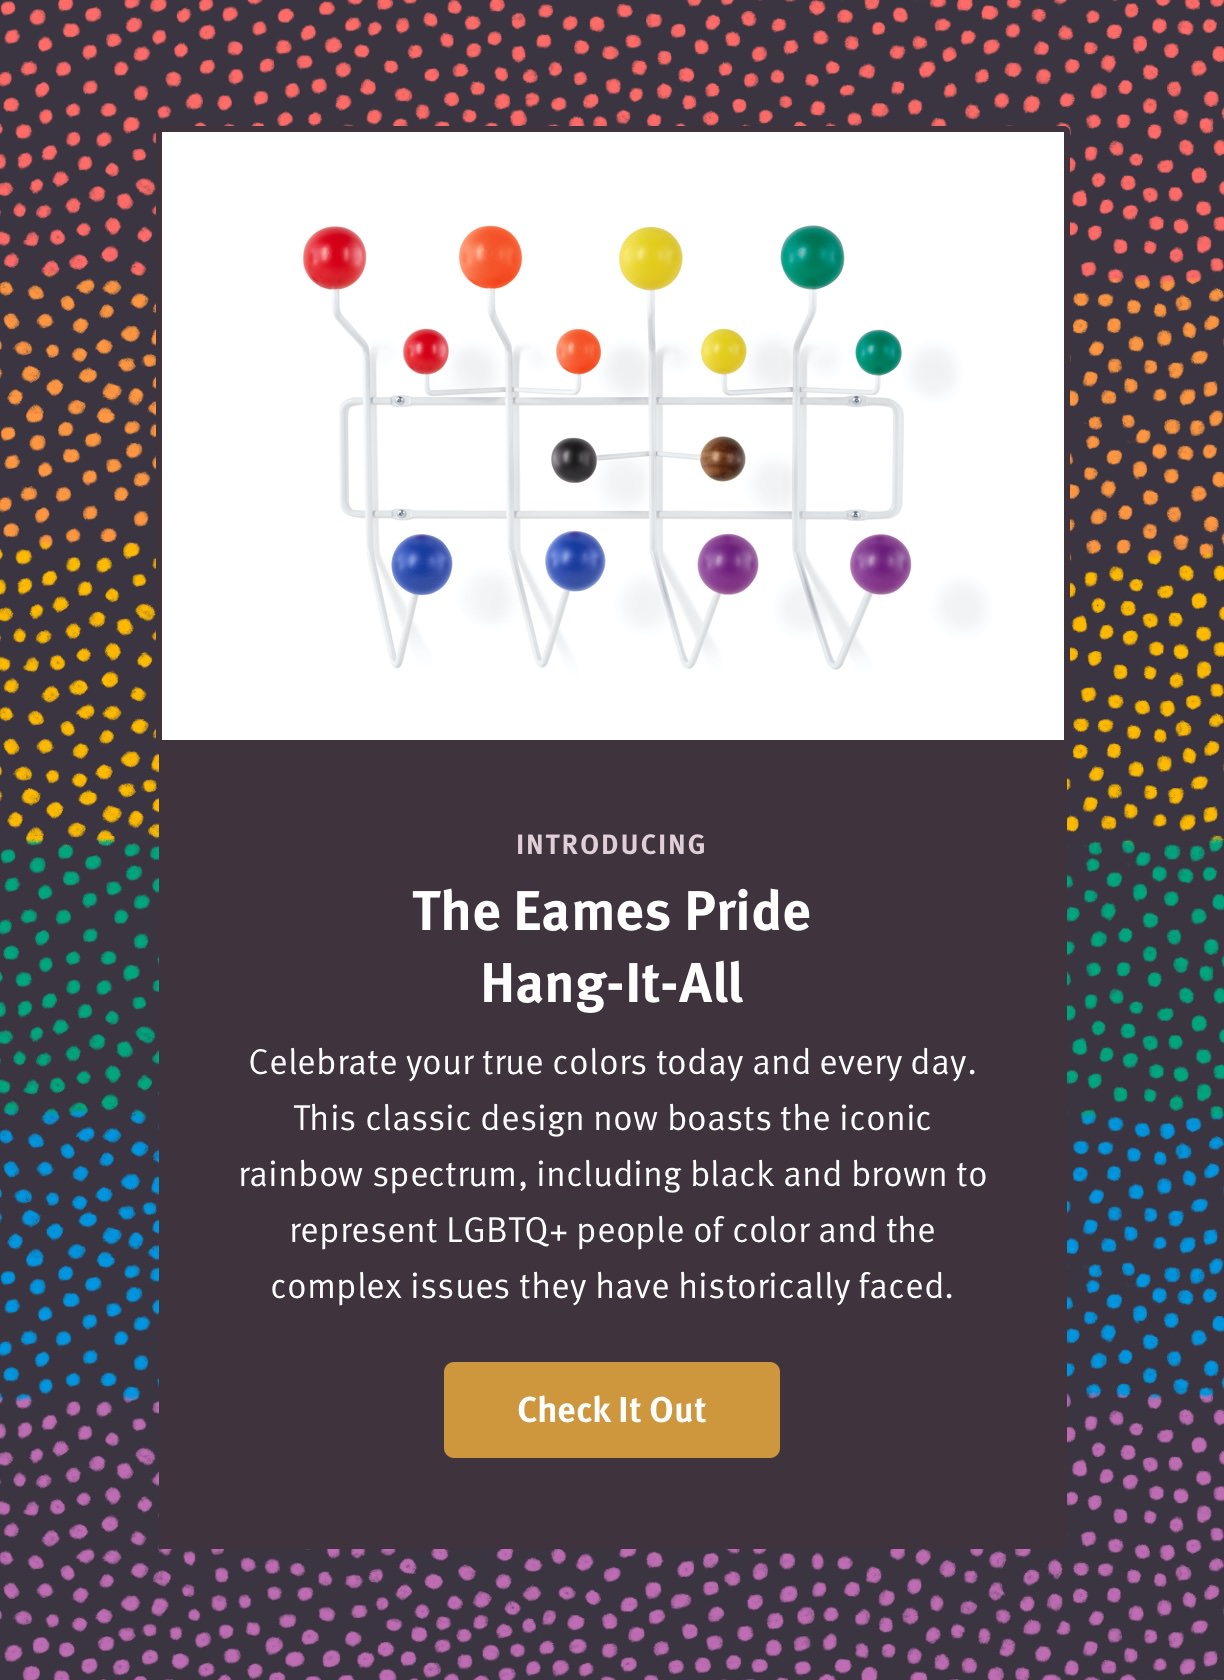 Introducing
The Eames Pride Hang-It-All
Shop Now